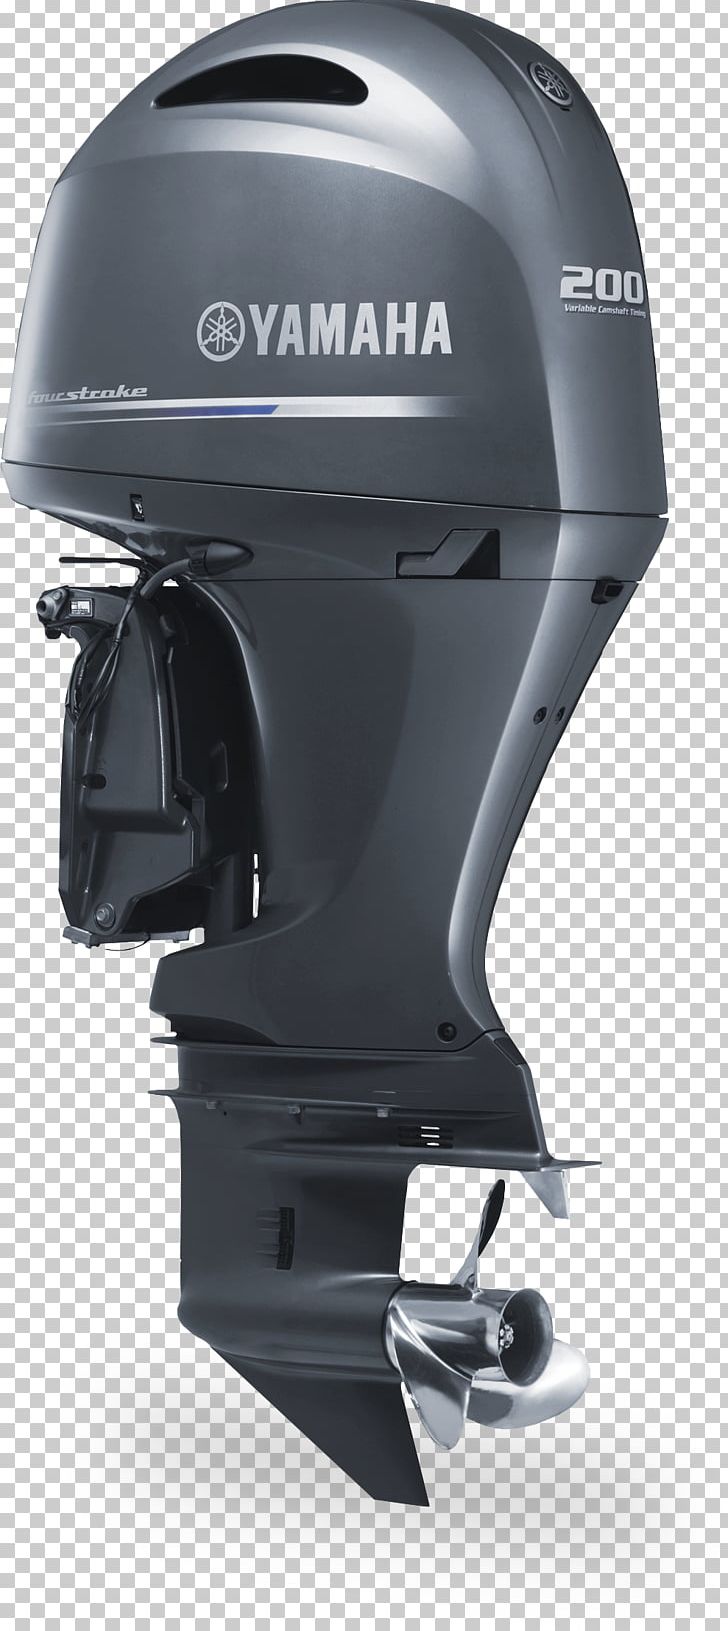 Yamaha Motor Company Outboard Motor Four-stroke Engine Boat PNG, Clipart, Bicycle Helmet, Bicycles Equipment And Supplies, Engine, Motor Boats, Motorcycle Accessories Free PNG Download